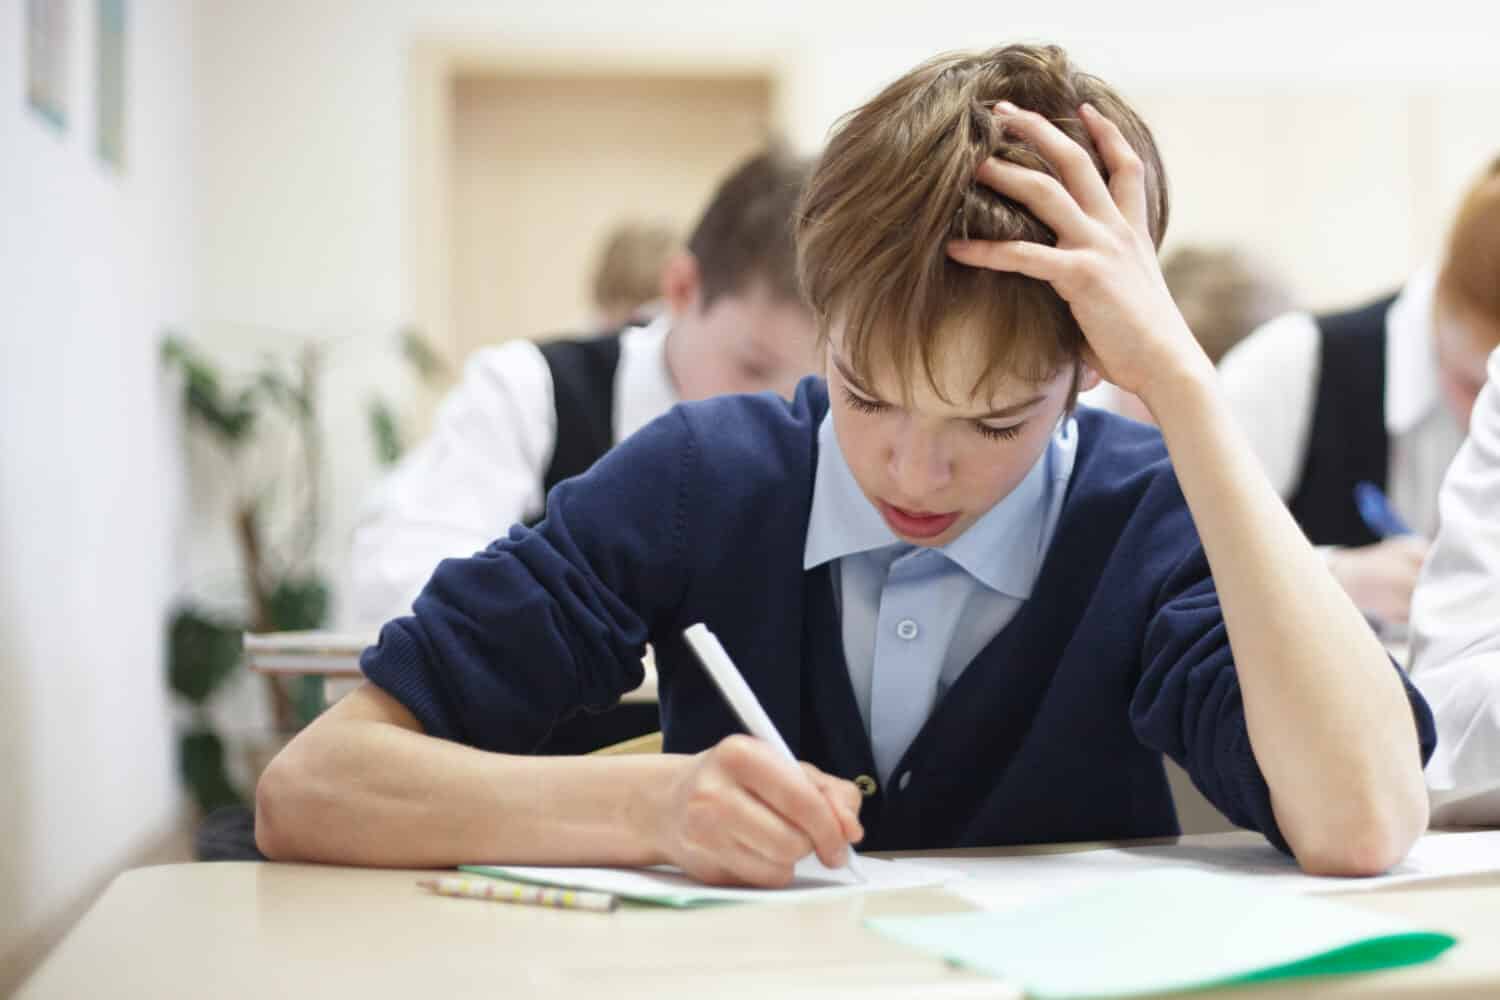 thoughtful school boy struggling to finish test in class.